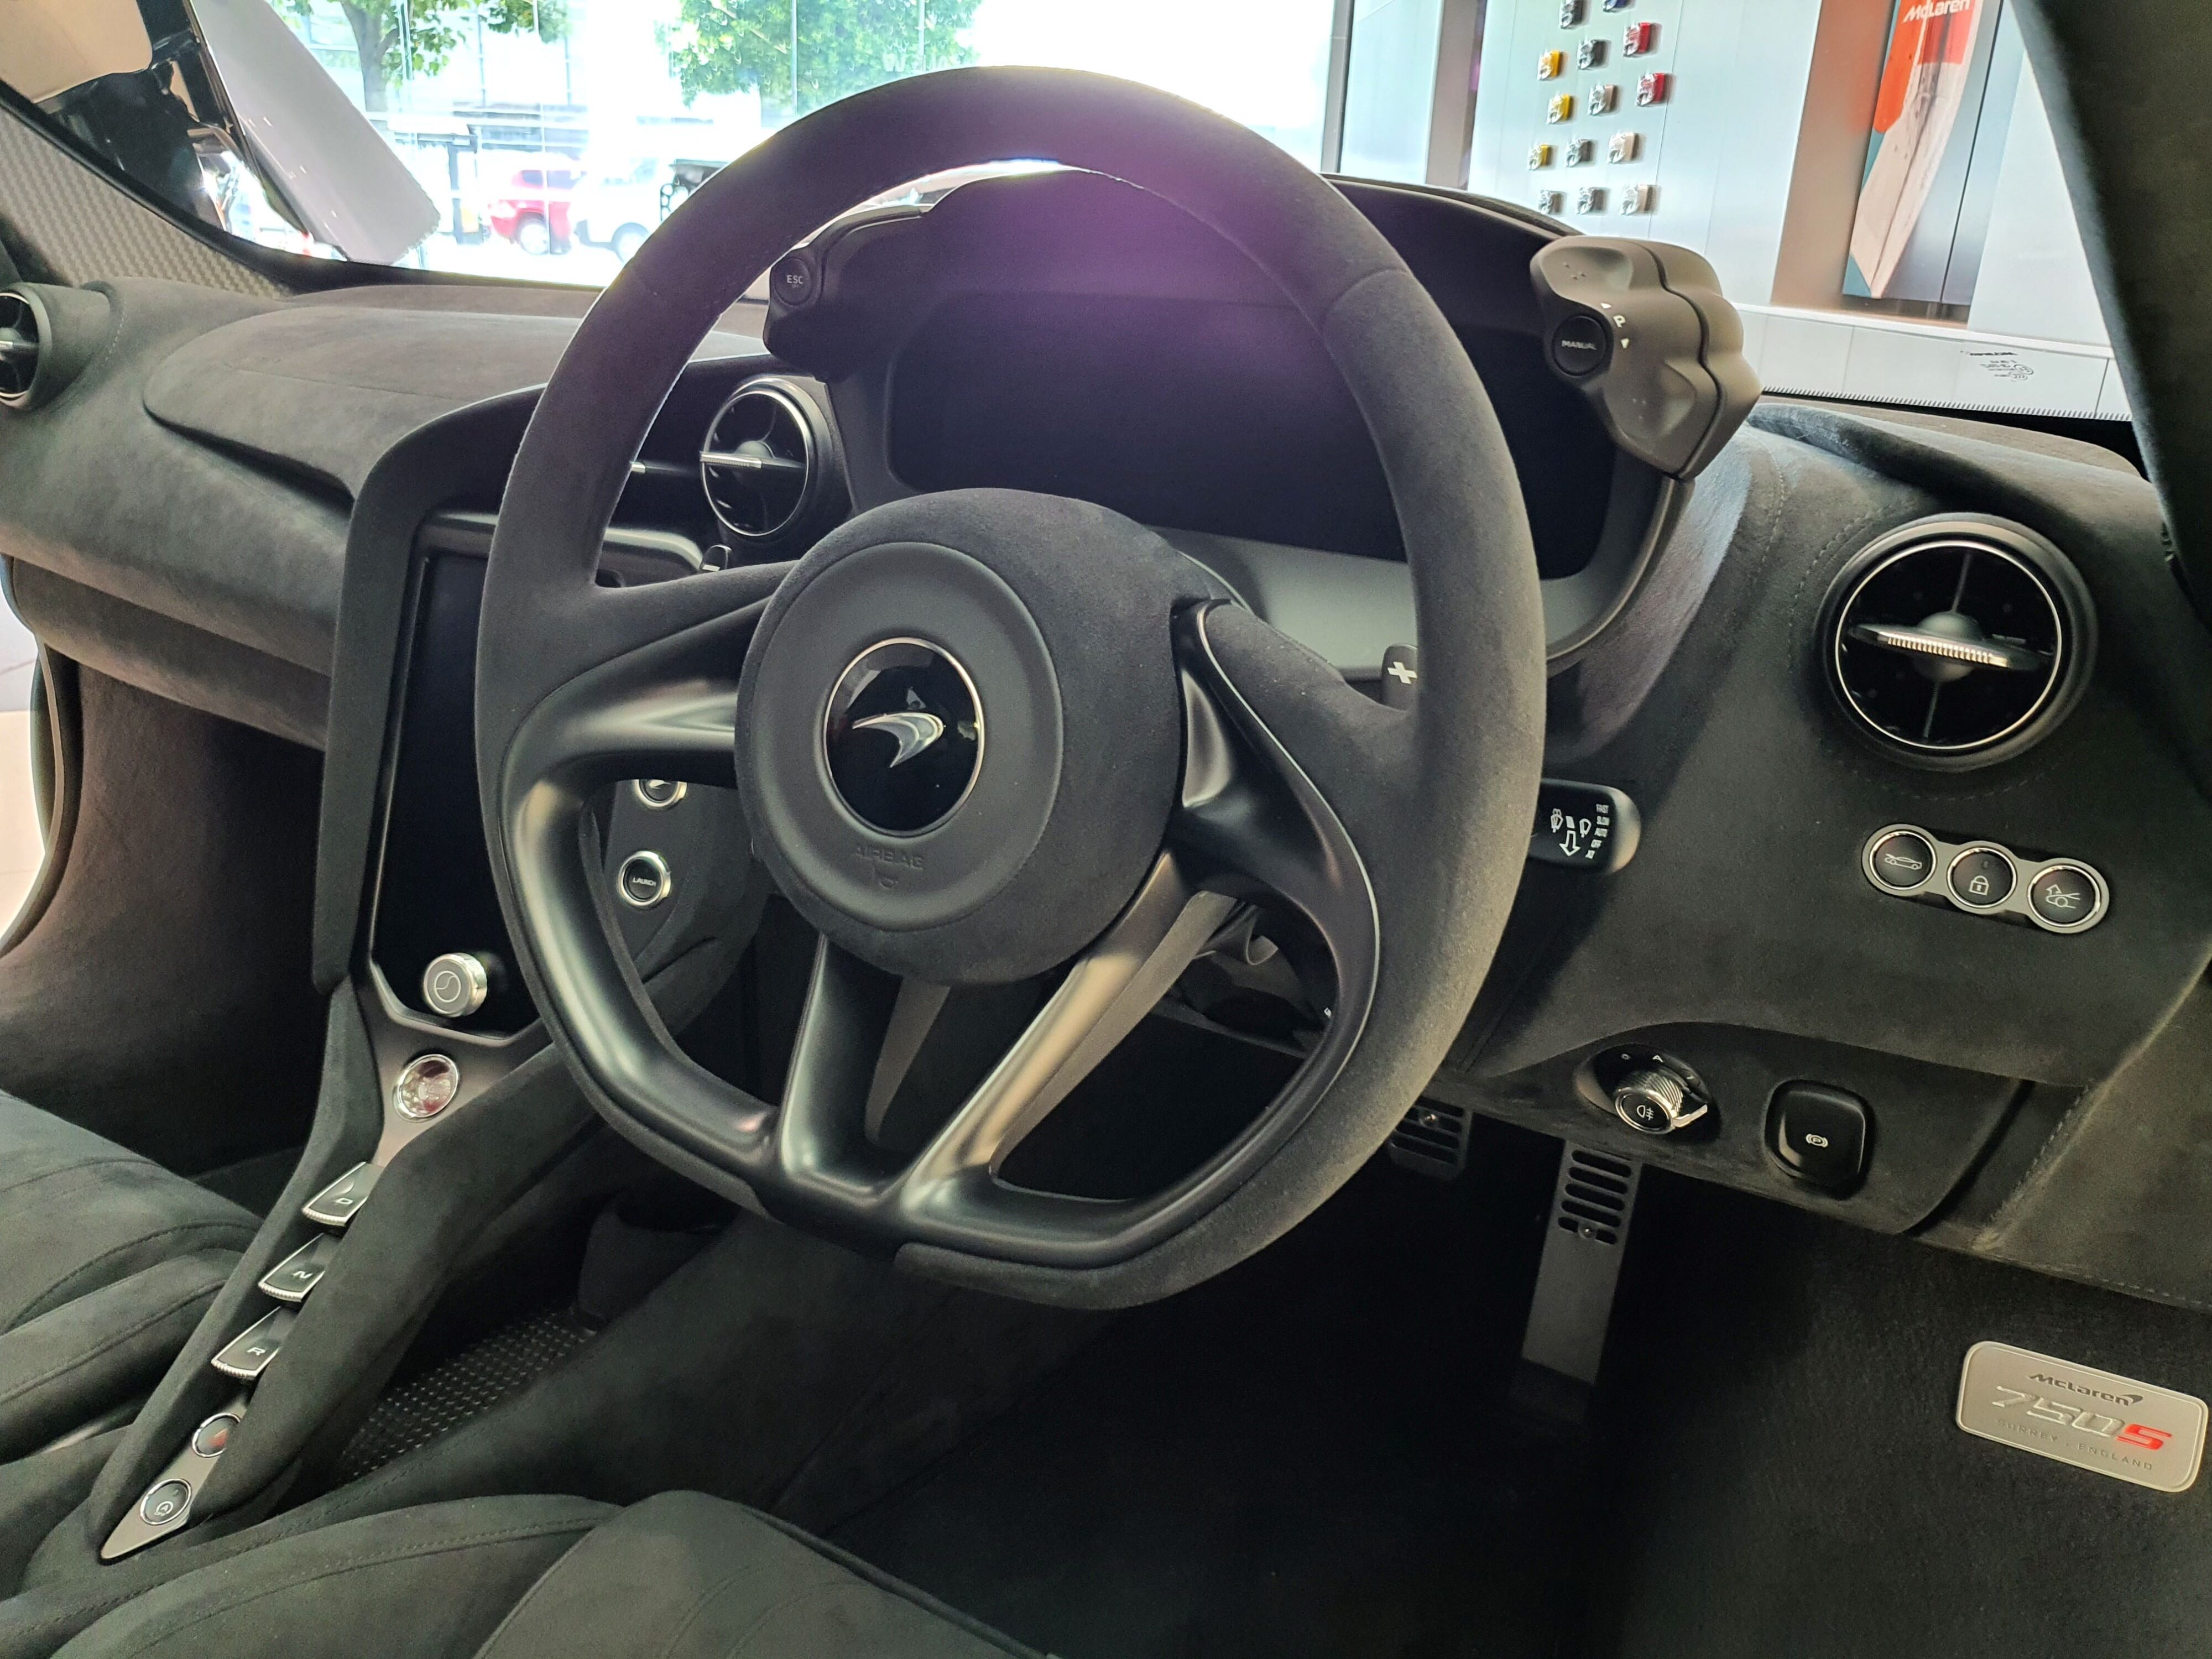 AN interior shot of the new McLaren 750S showing the steering wheel, gauge cluster and centre console.